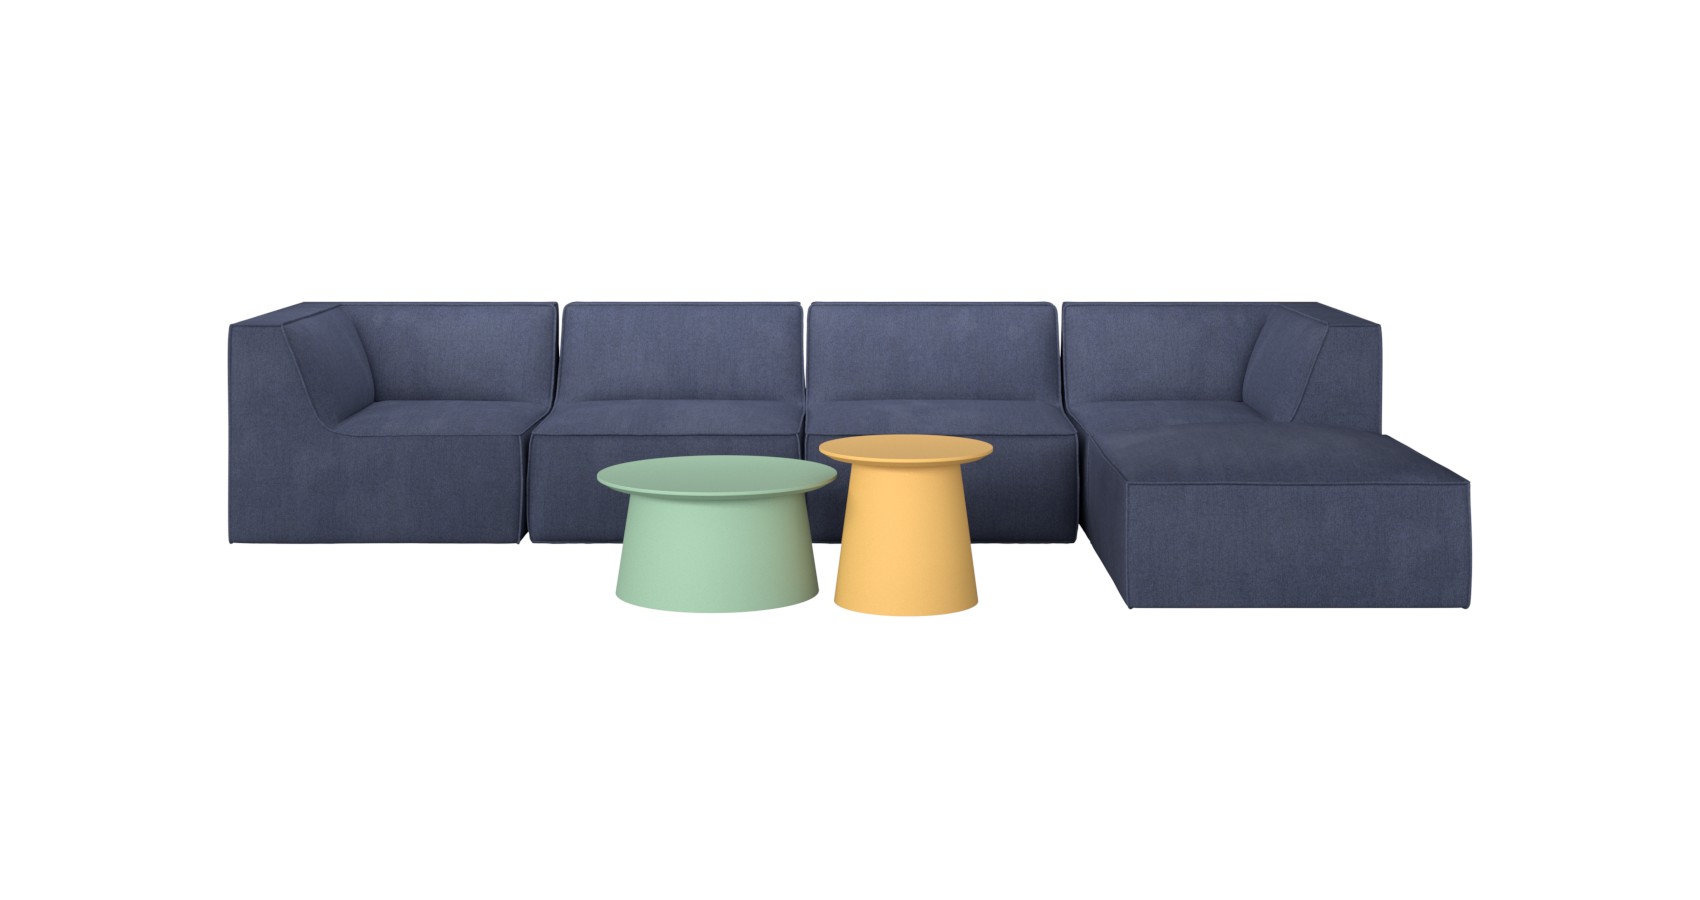 Hugs lounges with green and mustatd Bobbi coffee tables nested